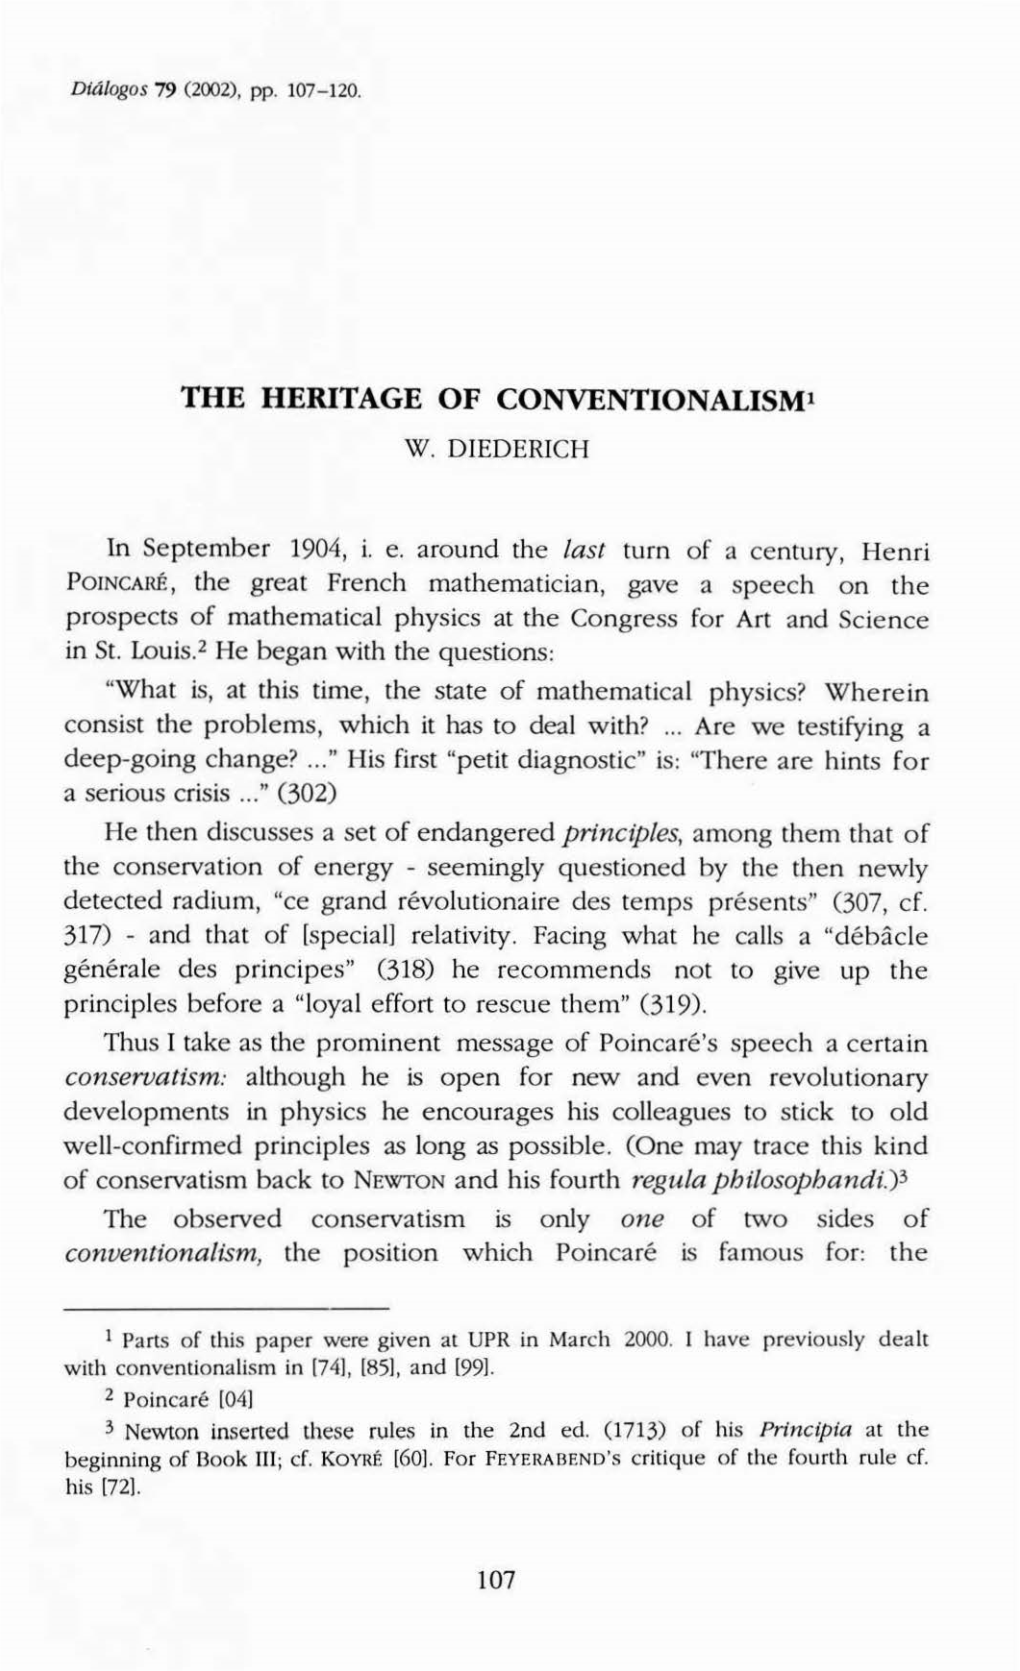 THE HERITAGE of Conventionalisml W